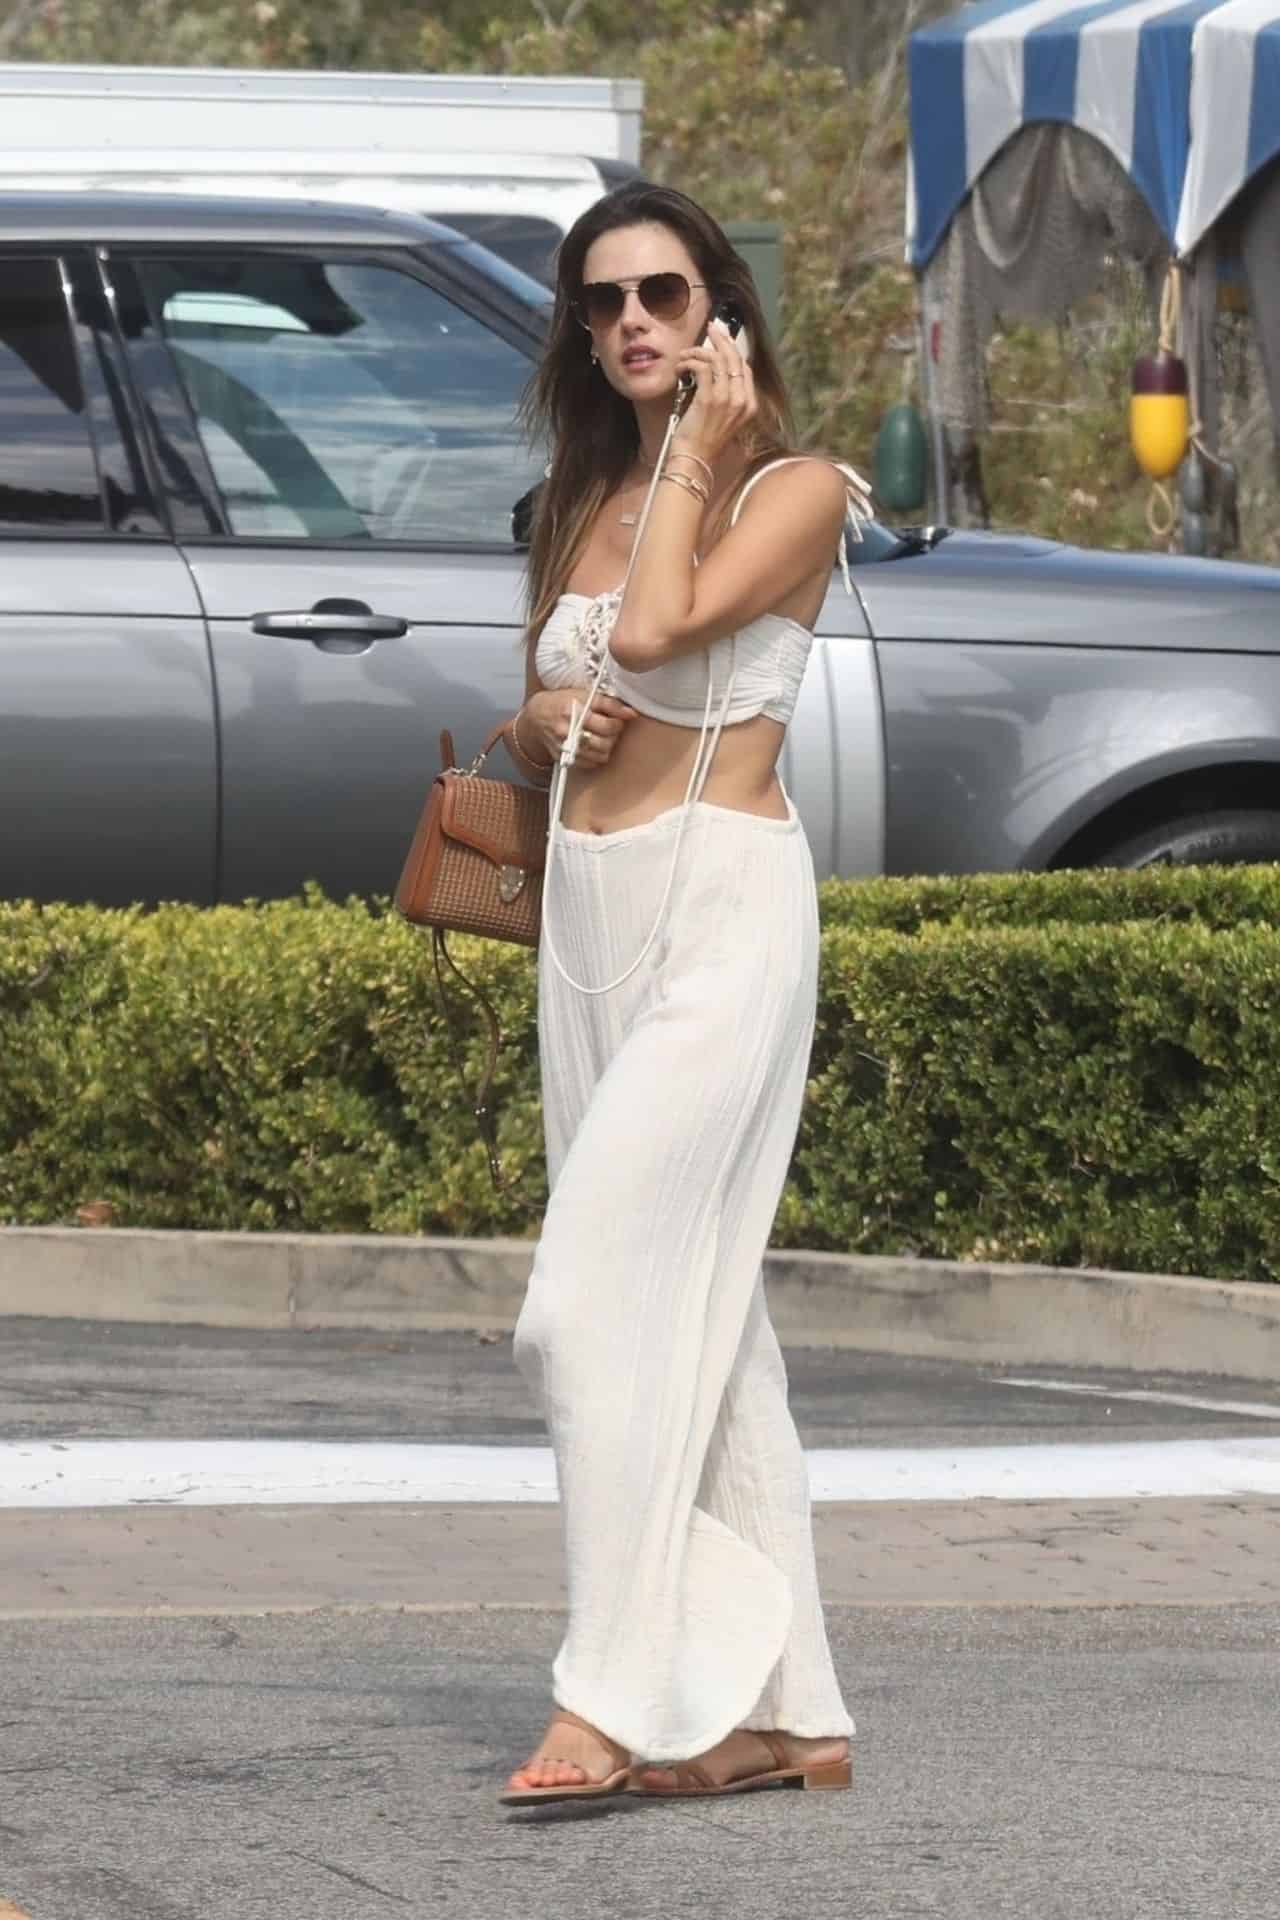 Alessandra Ambrosio Looks Amazing After Shopping at Howdy’s in Malibu